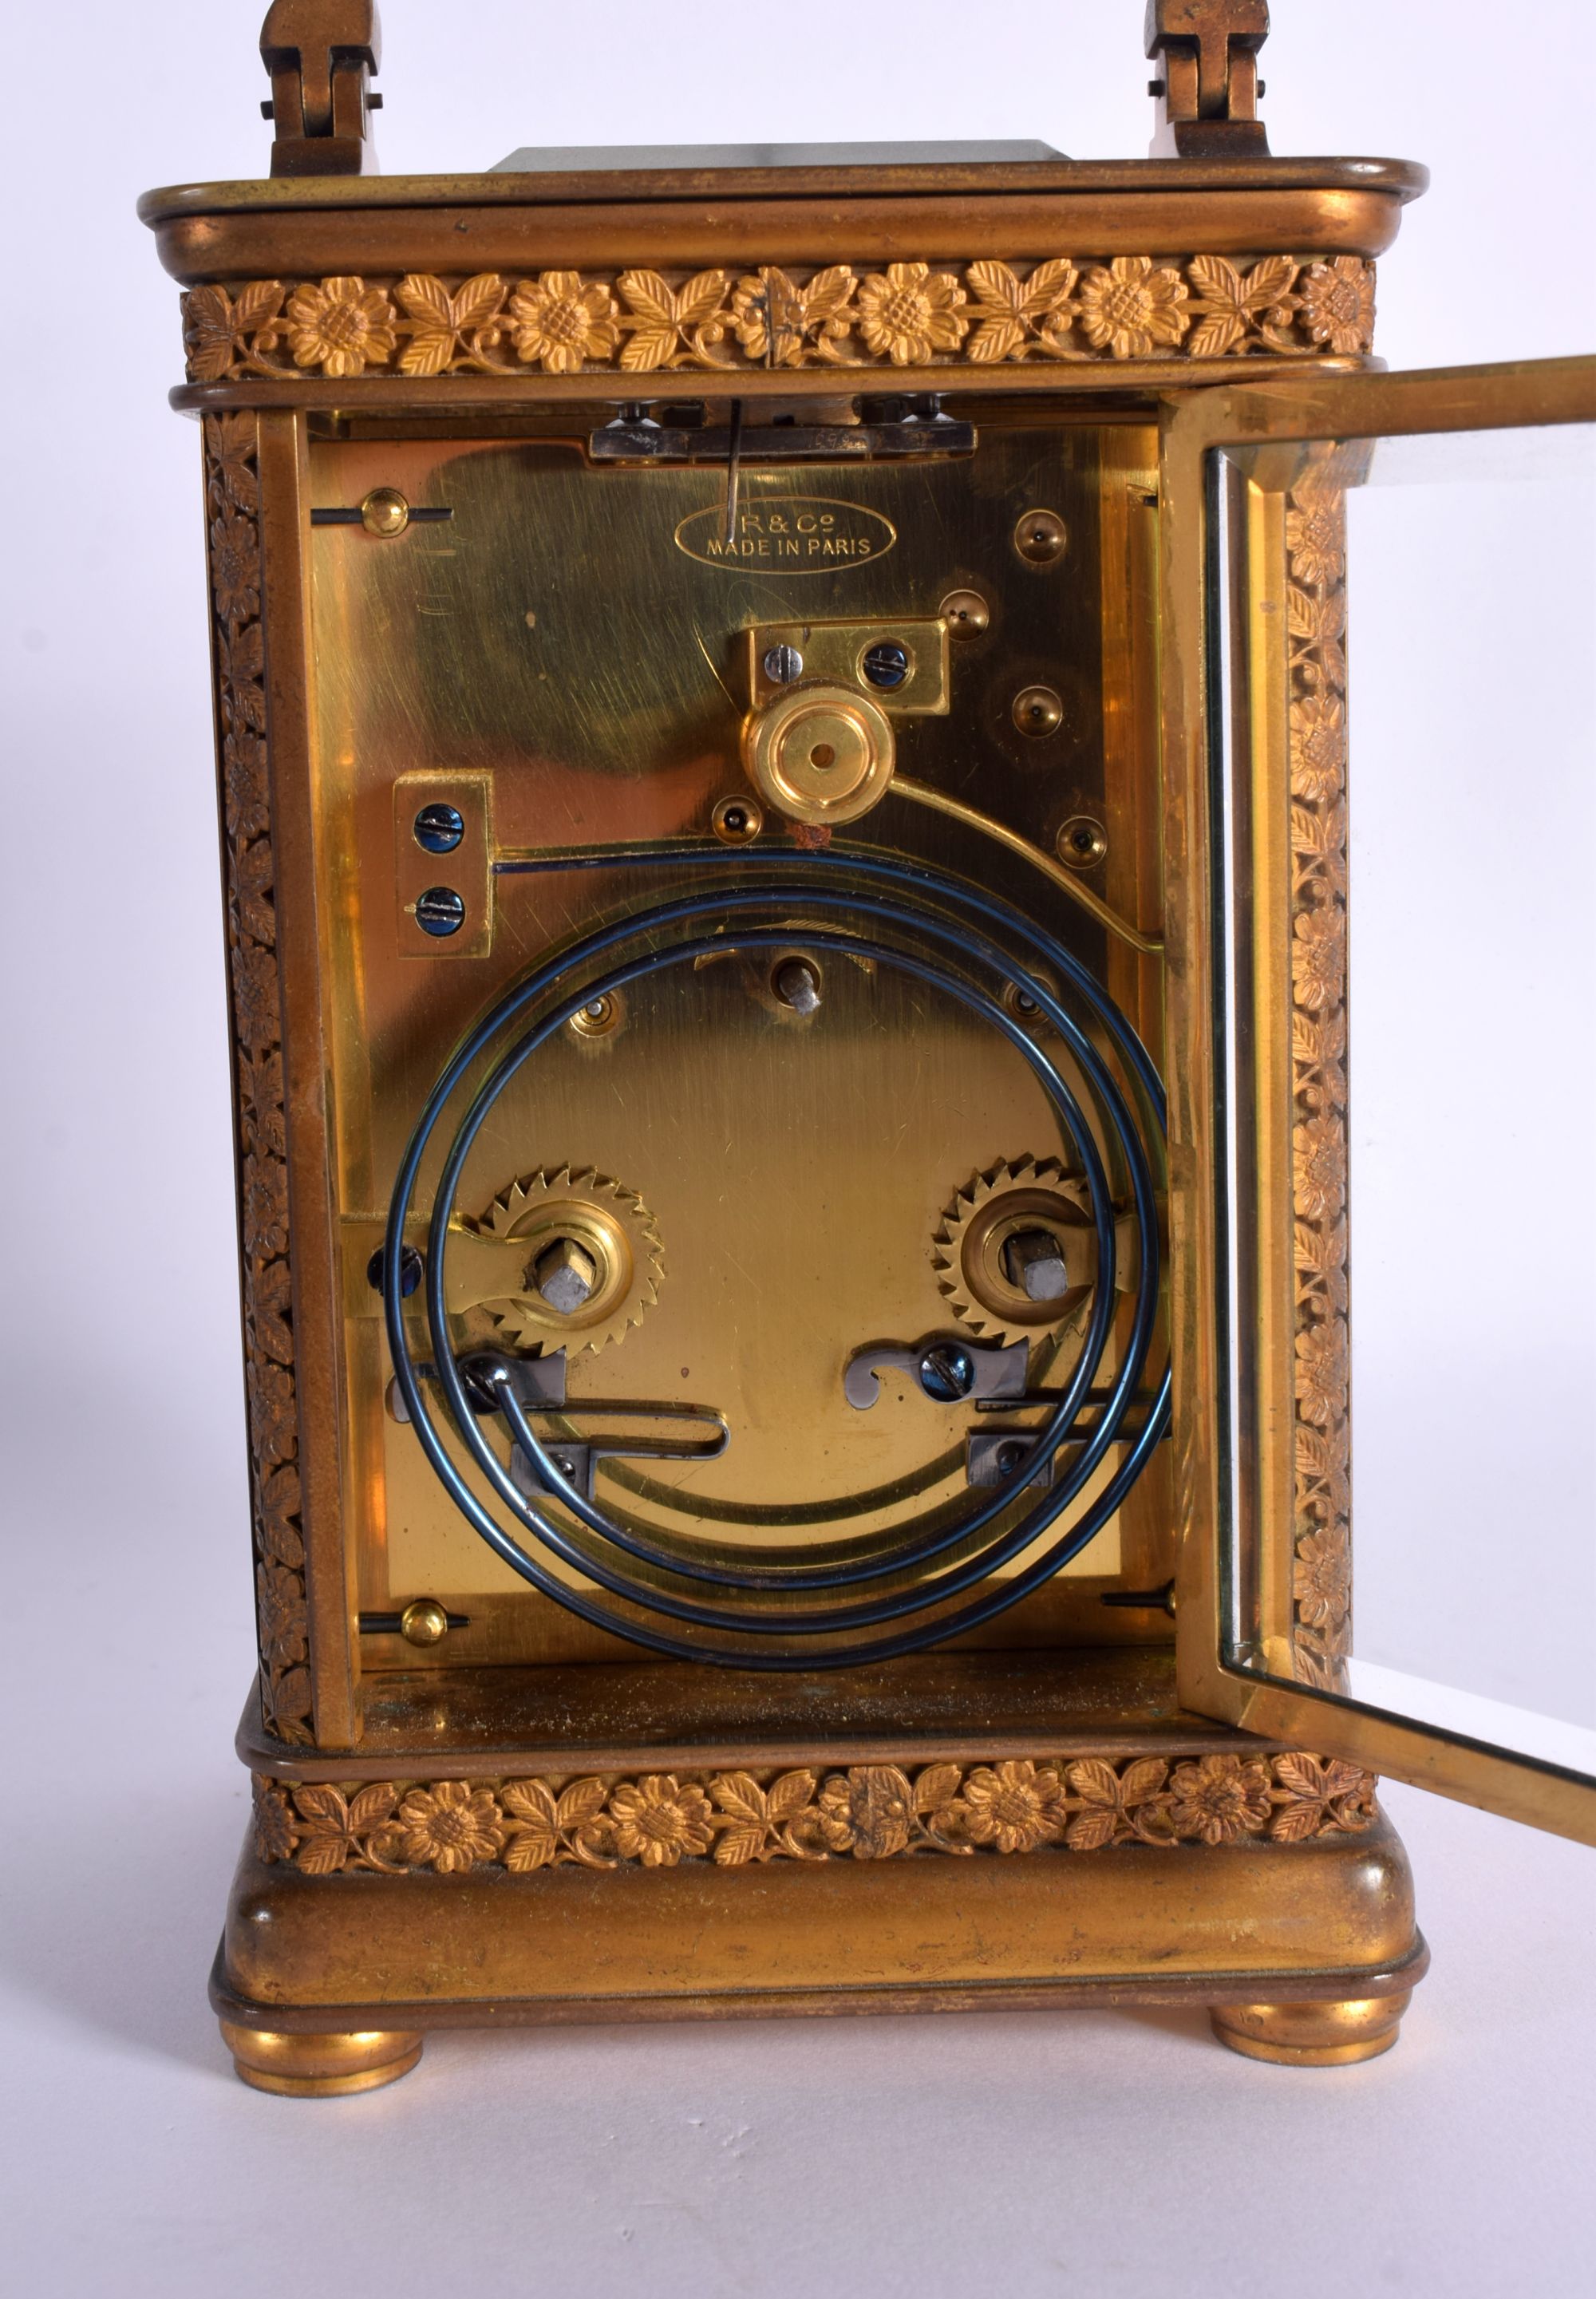 AN ANTIQUE FRENCH BRASS REPEATING CARRIAGE CLOCK with foliate engraved case and handle. 18.5 cm high - Image 3 of 5